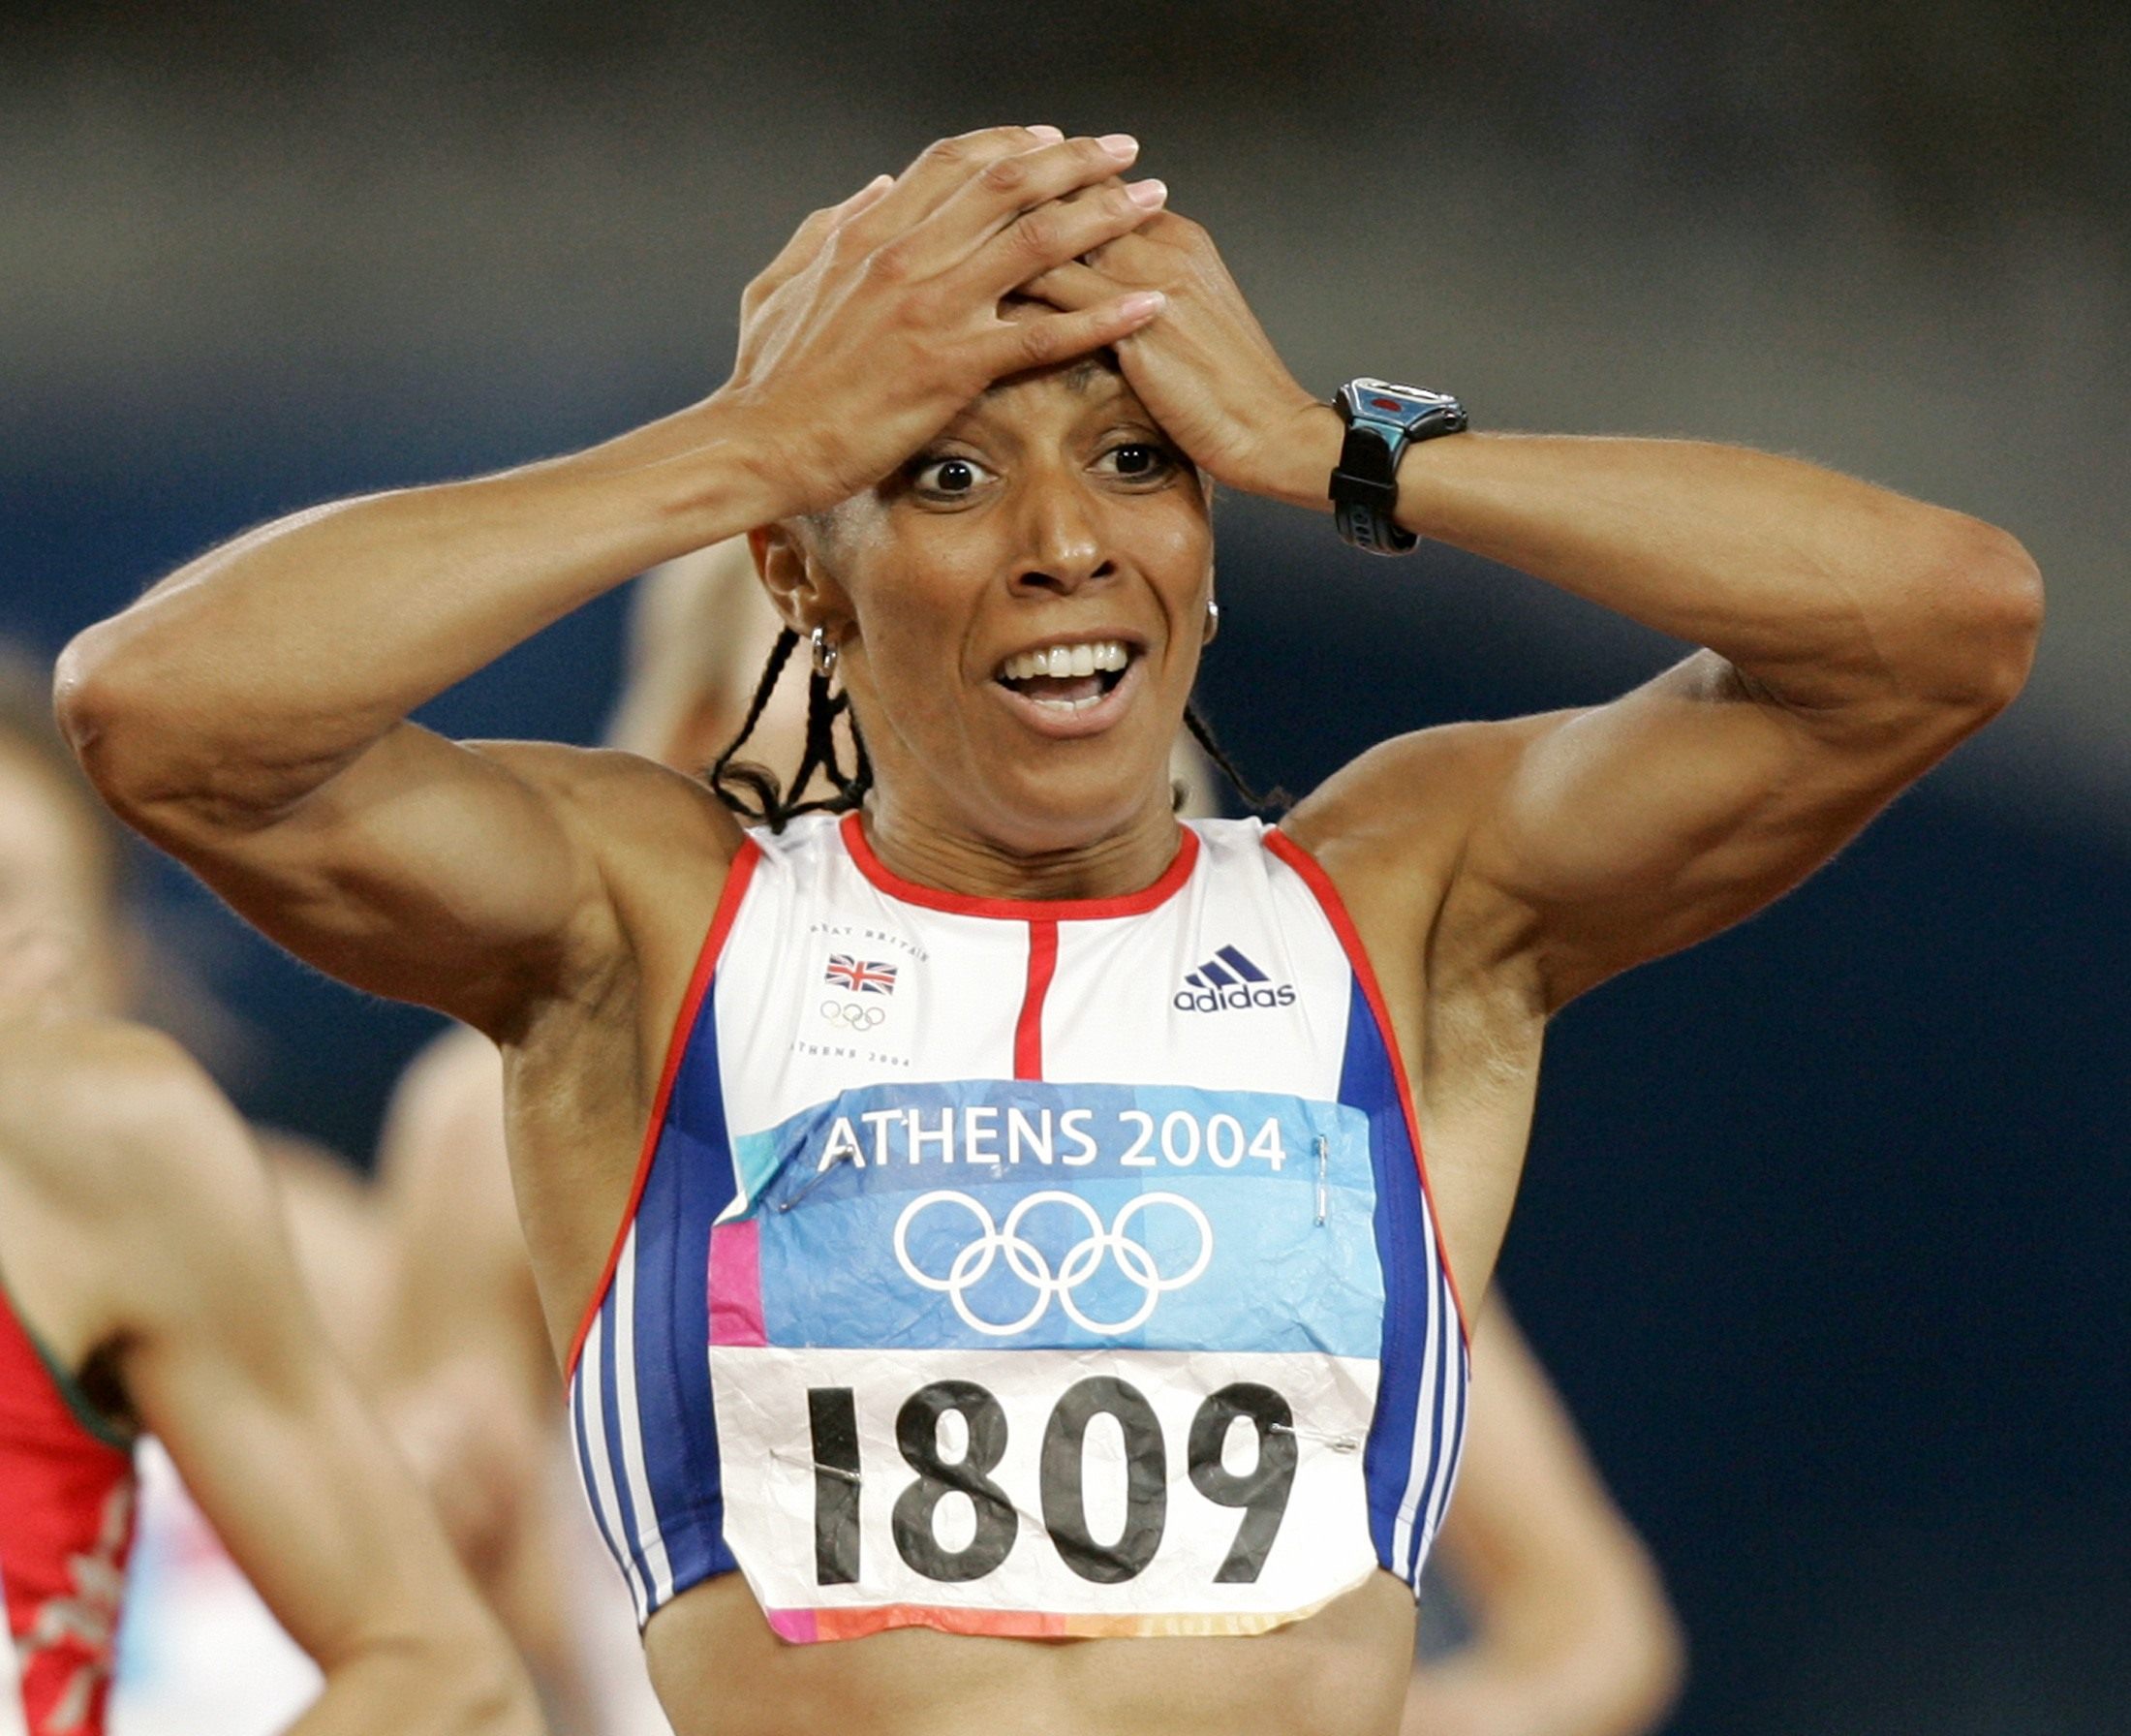 Britain’s Kelly Holmes celebrates her victory in the women’s 1500 metres final at the Athens 2004 Olympic Games. She has now come out as gay, aged 52, after “years of heartache”. Photo: Reuters